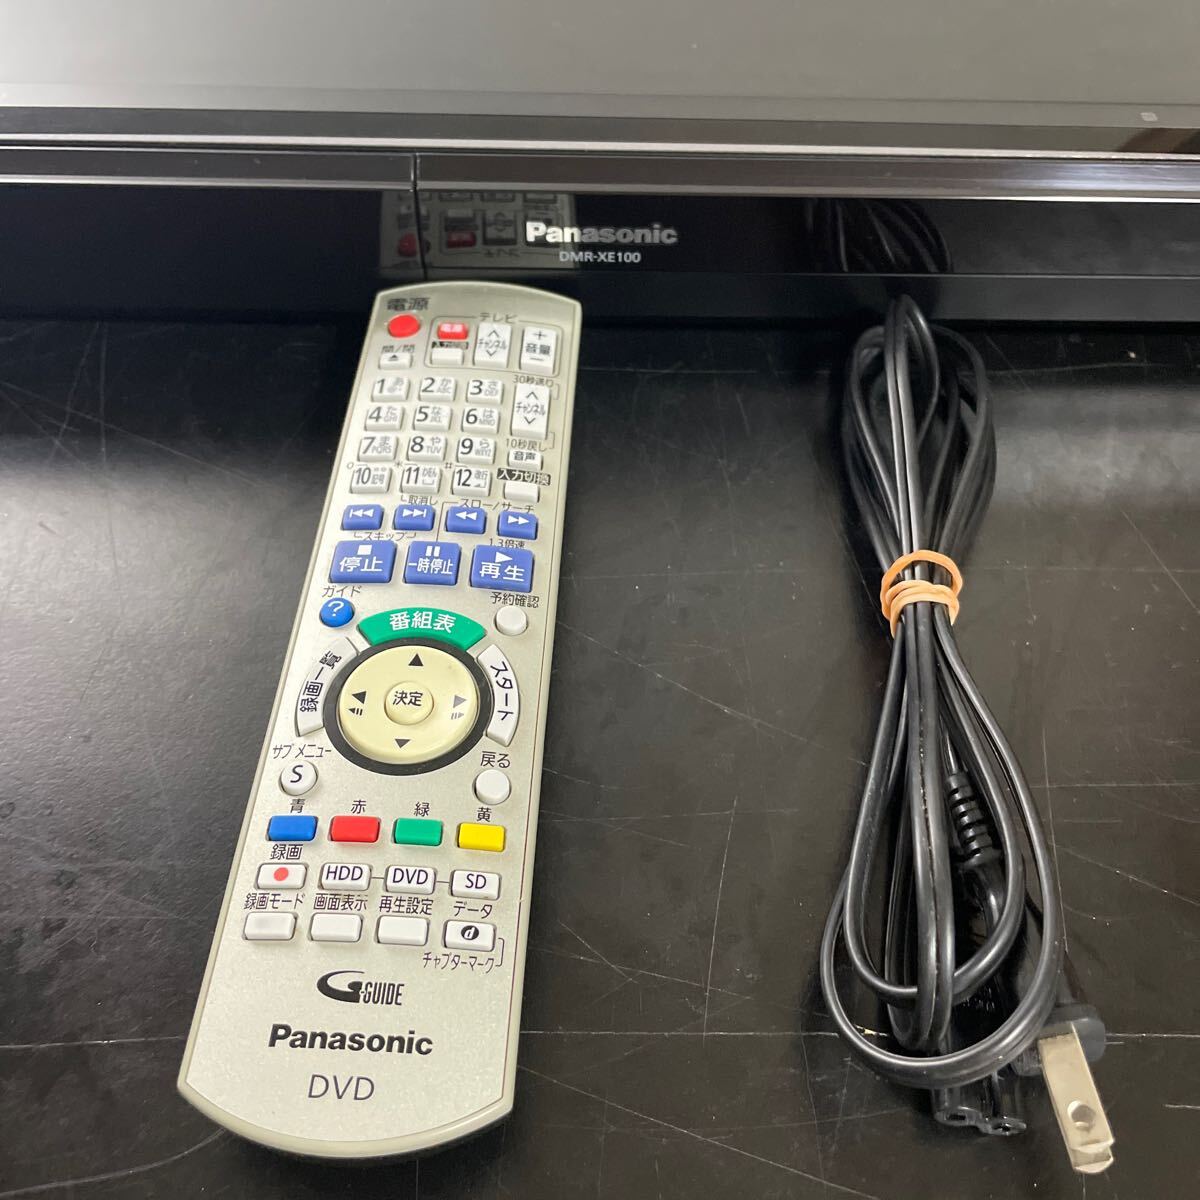 Panasonic DVD recorder digital broadcasting HDD DMR-XE100 remote control attaching 2011 year product 